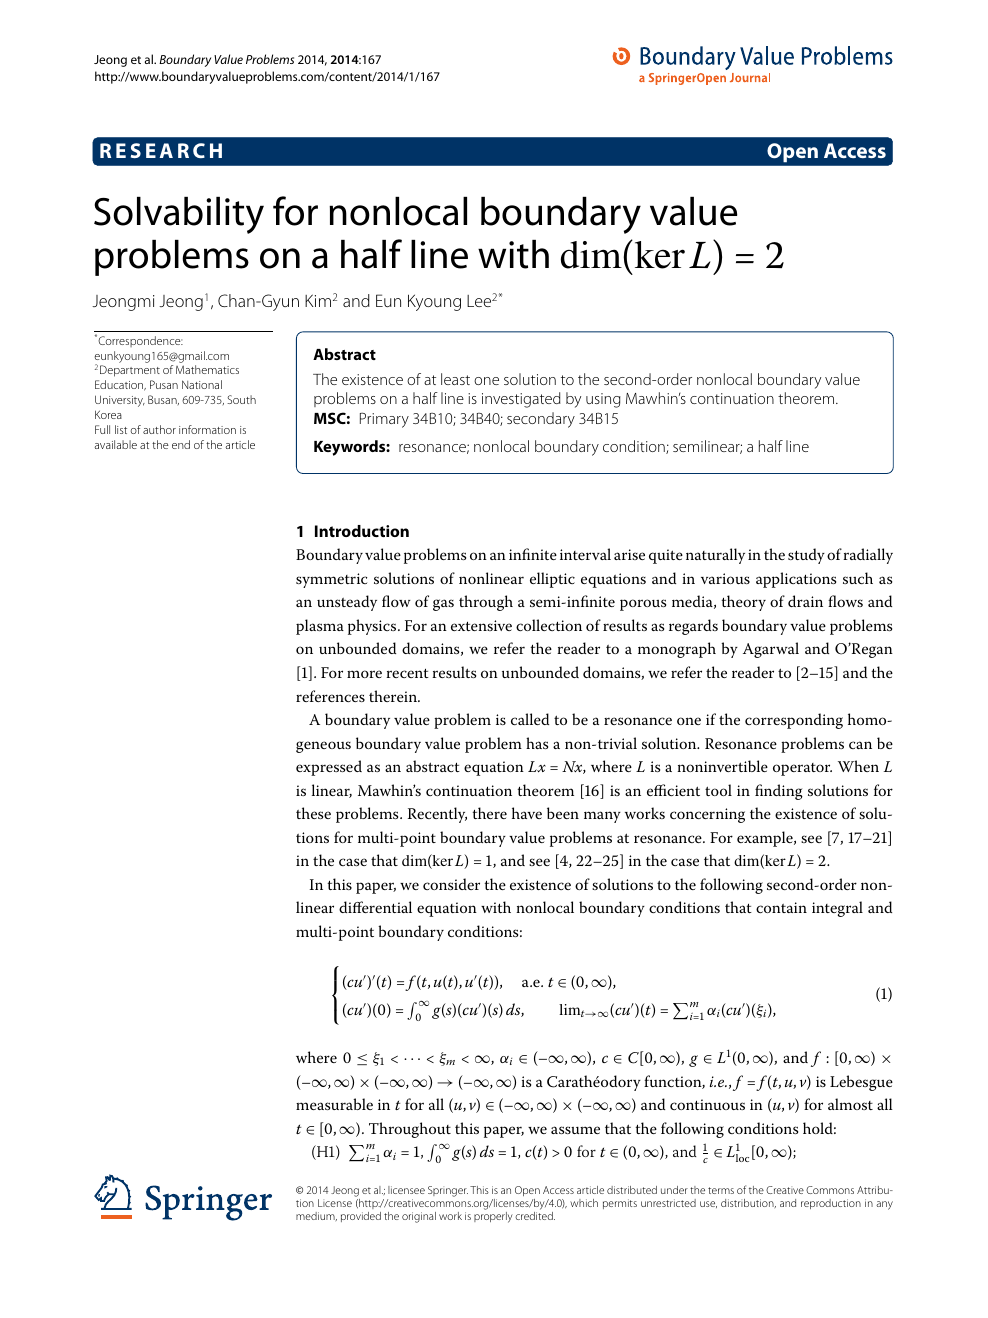 Solvability For Nonlocal Boundary Value Problems On A Half Line With Dim Kerl 2 Topic Of Research Paper In Mathematics Download Scholarly Article Pdf And Read For Free On Cyberleninka Open Science Hub